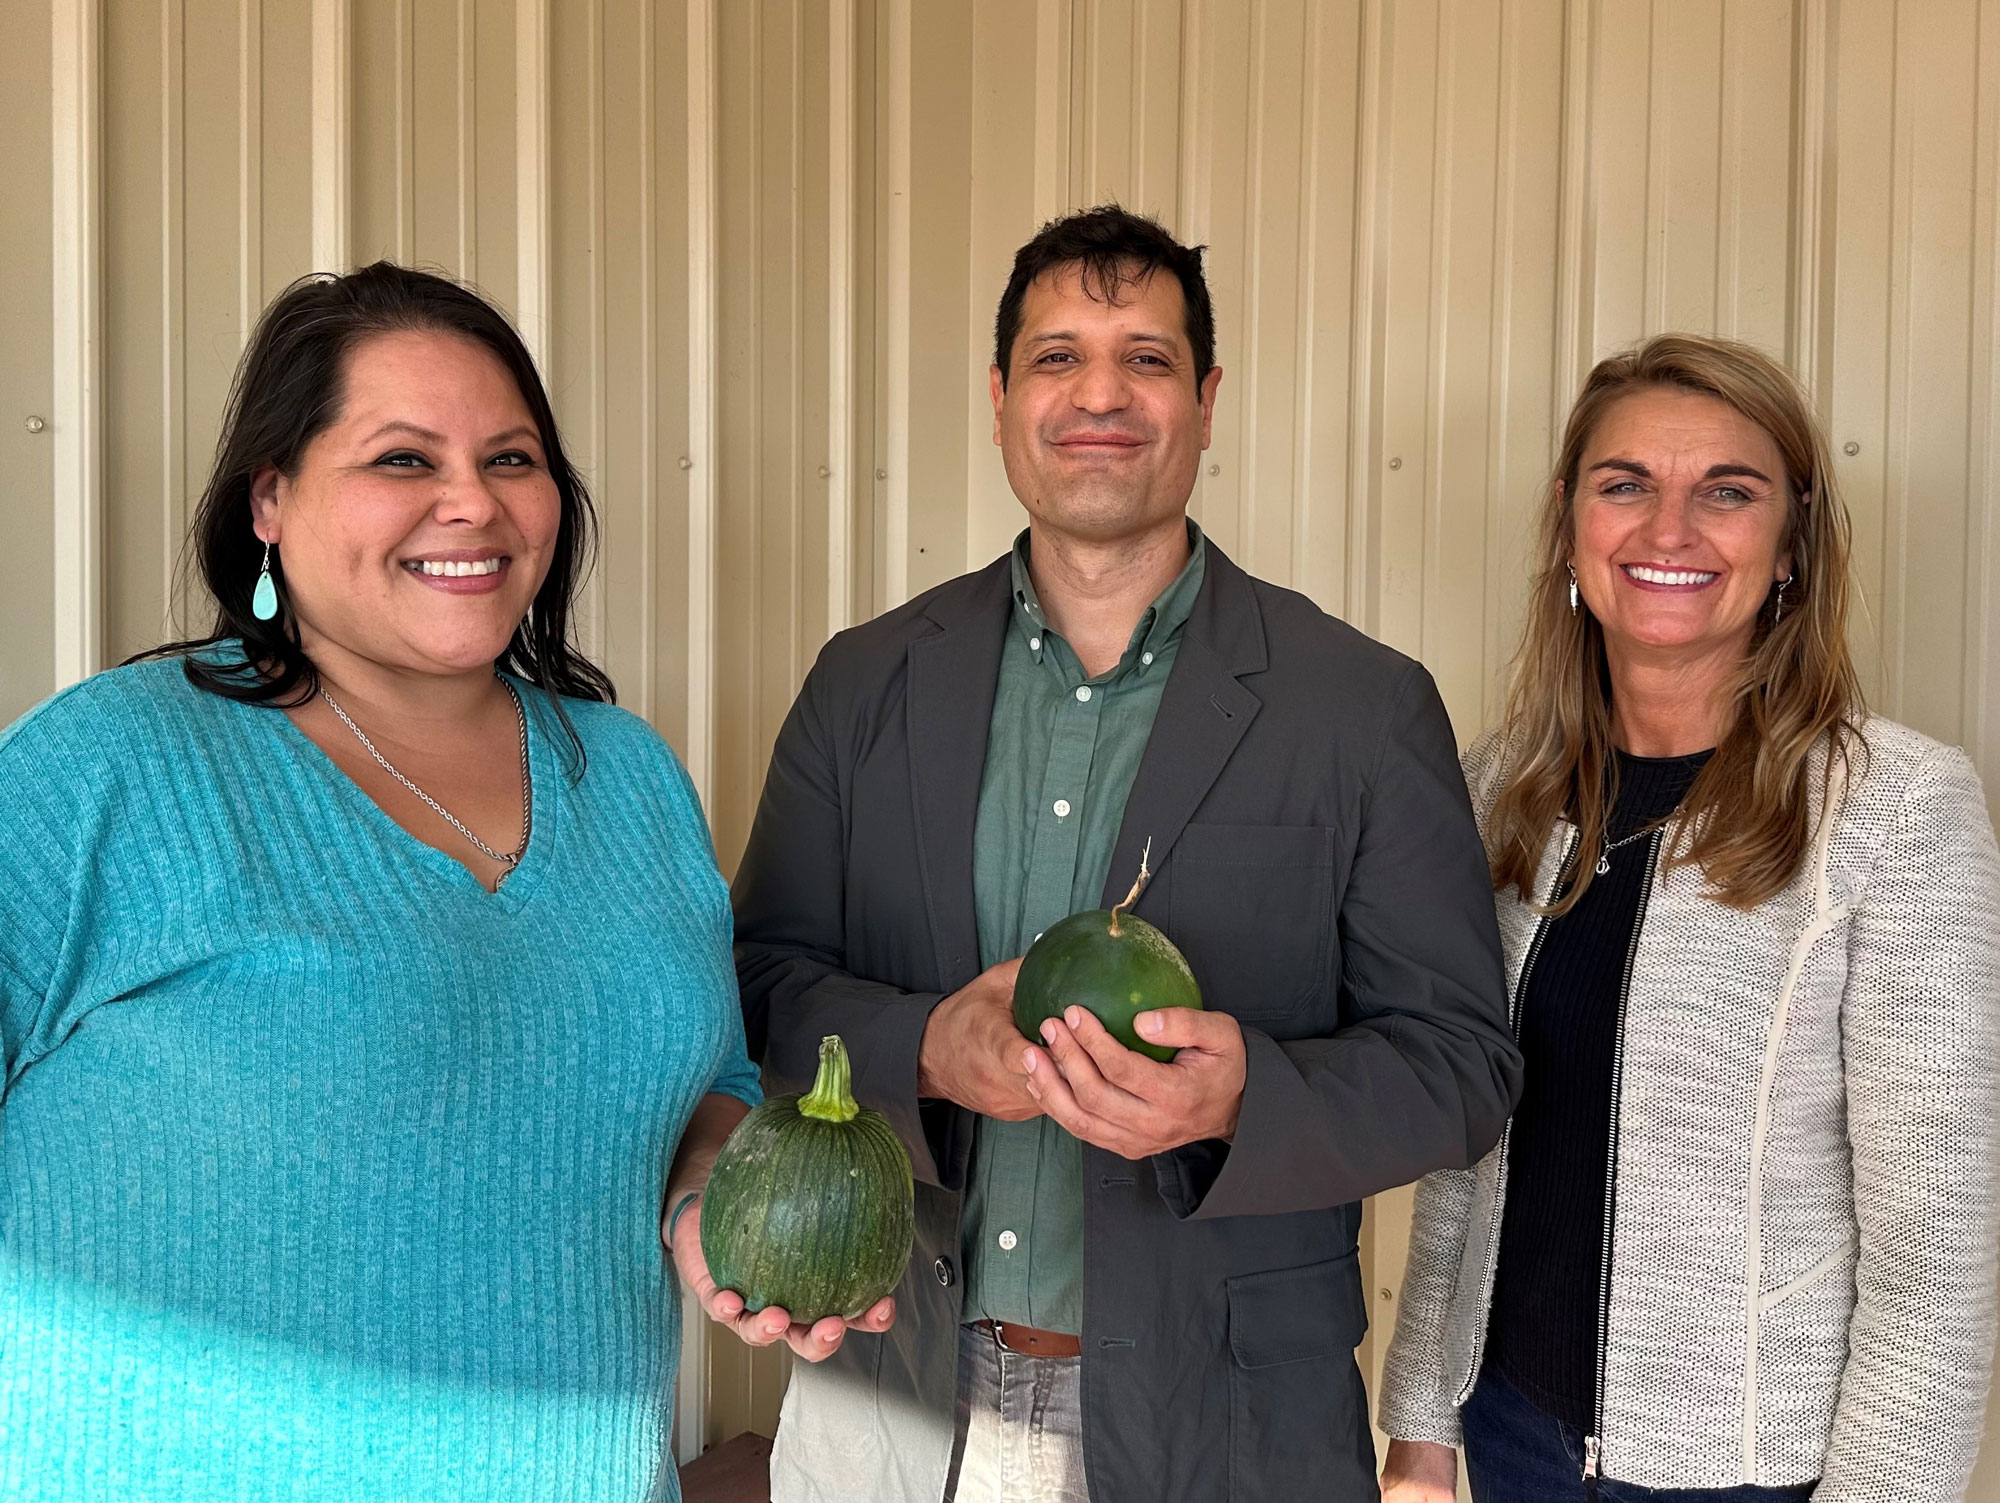 Jessika Free-Bass and Mario Ramos hold garden produce and stand with Cheryl Kennedy